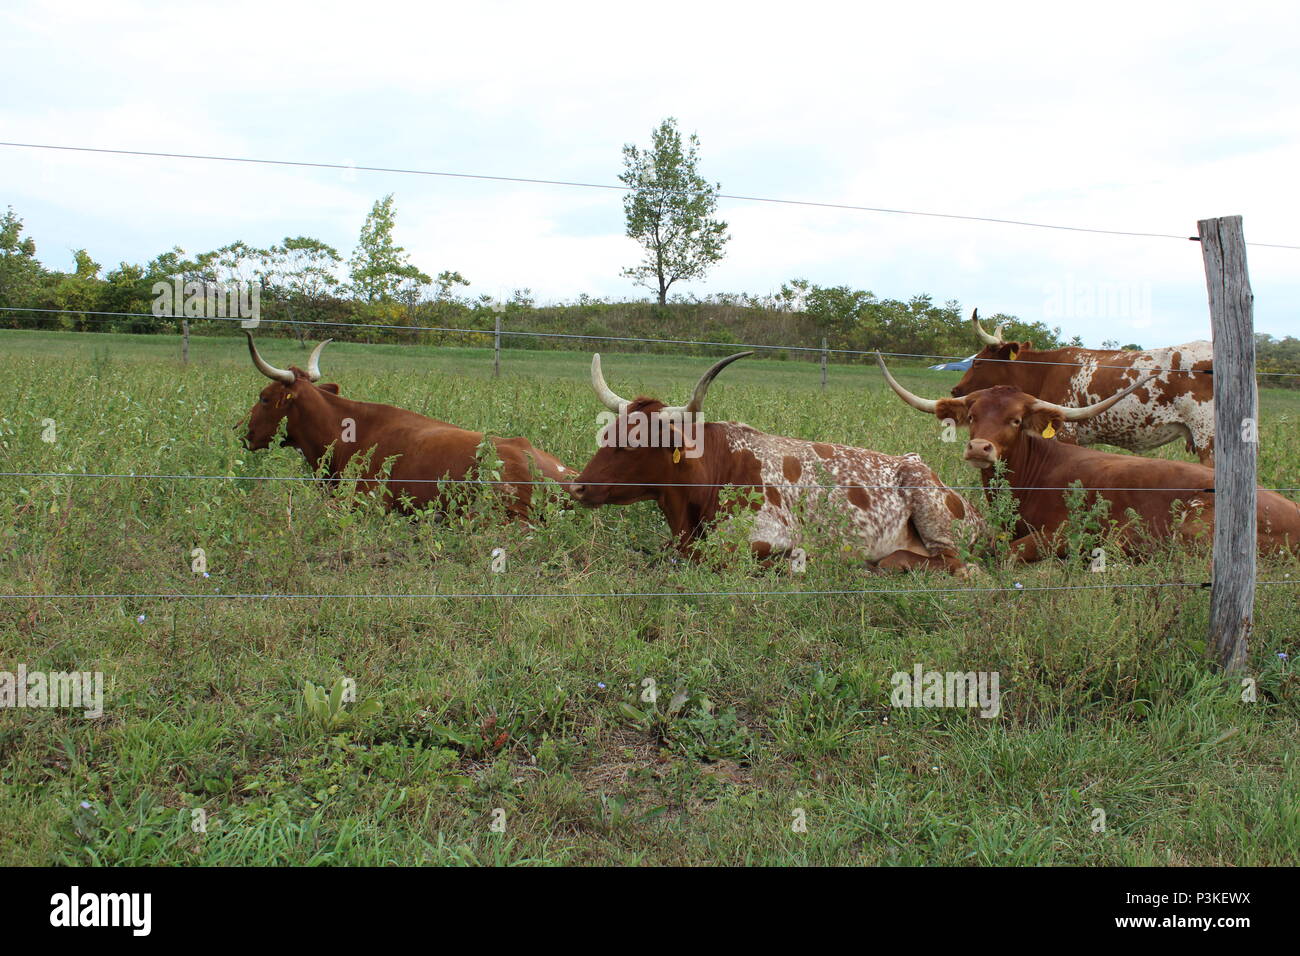 Cattle Farm on the Way to The Windmill in Penn Yan, New York Stock Photo